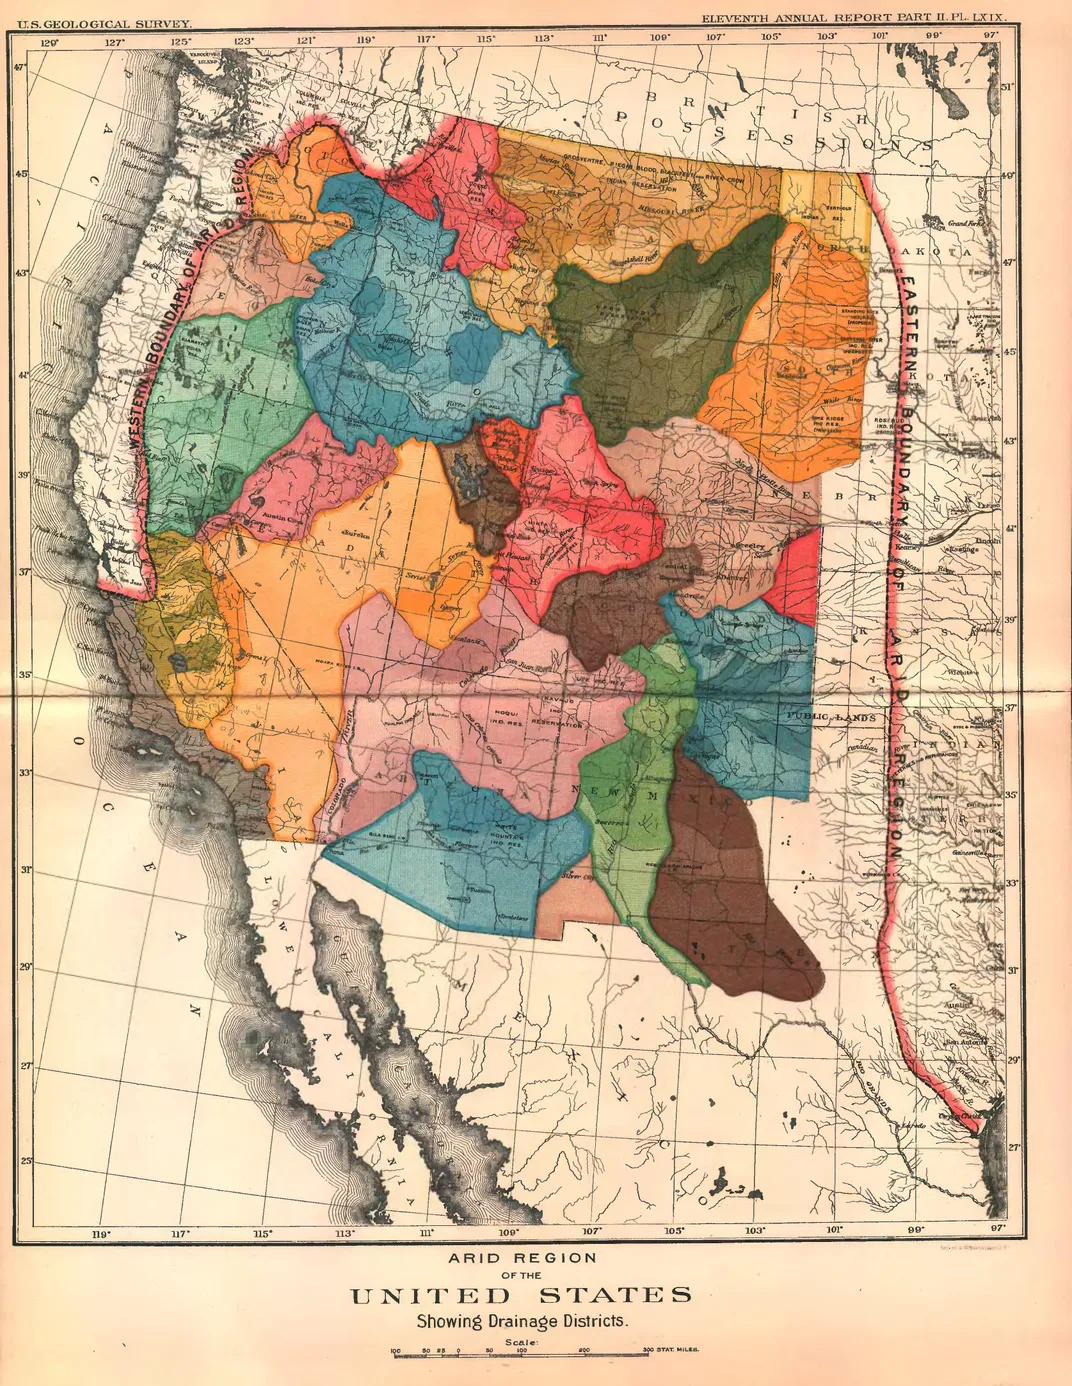 Powell's map